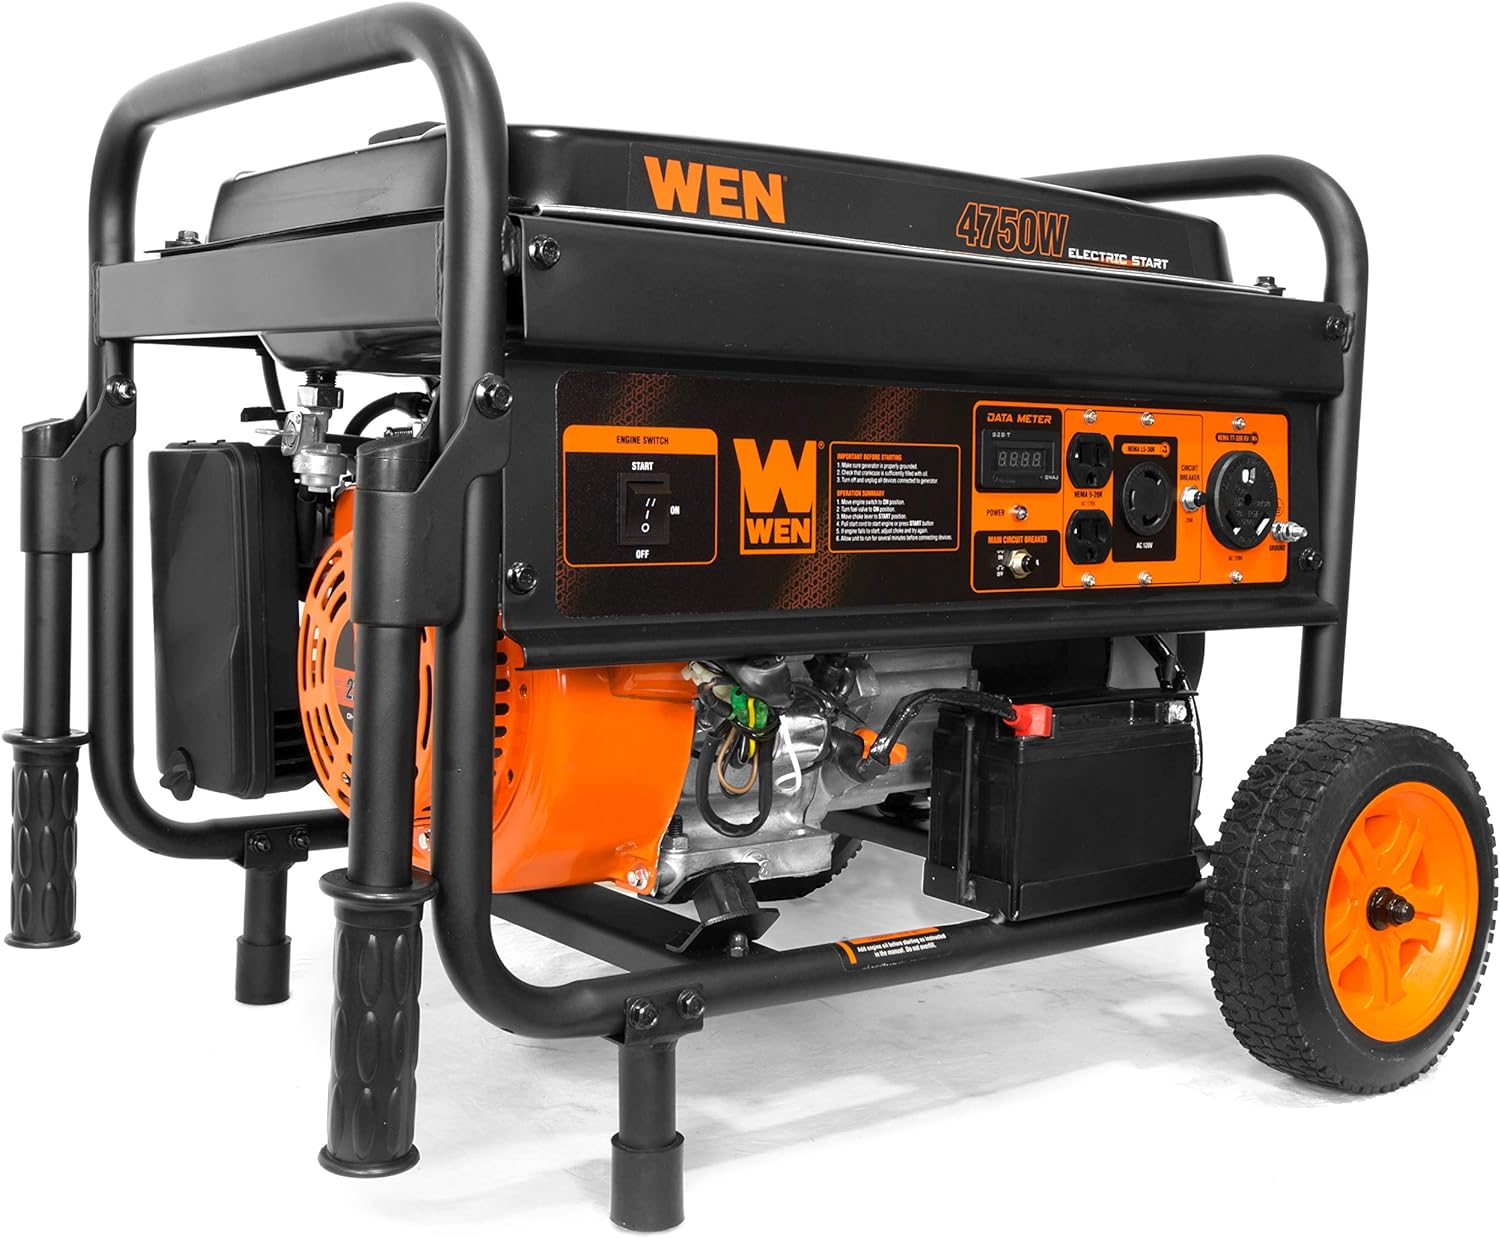 WEN 56475 4750-Watt Portable Generator with Electric Start and Wheel Kit, Yellow and Black - WEN 56475 Portable Generator Review